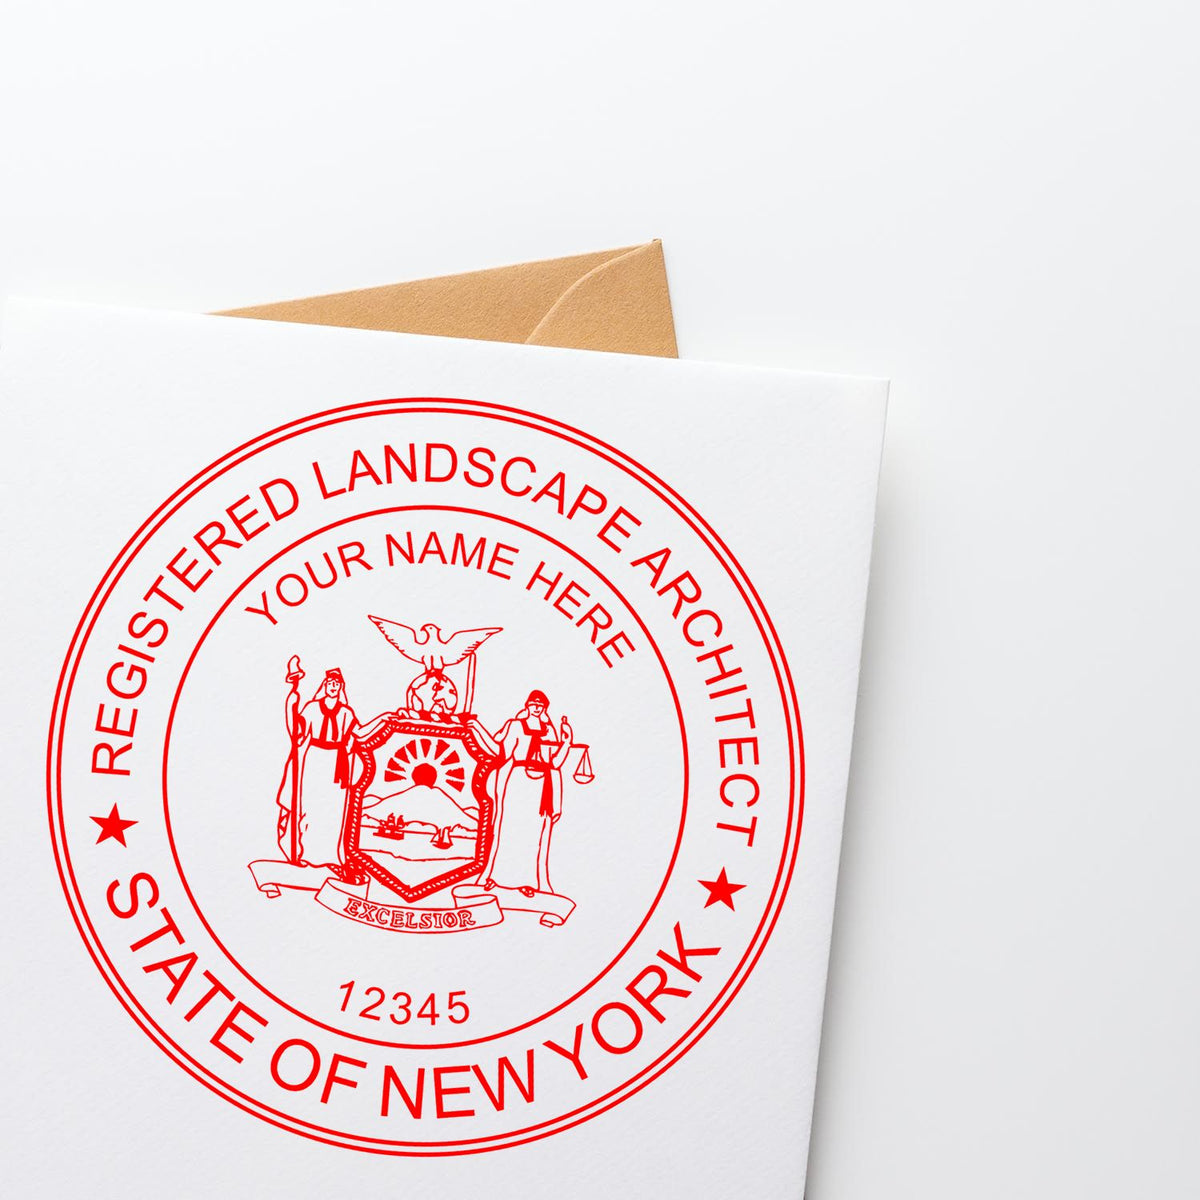 A stamped impression of the Slim Pre-Inked New York Landscape Architect Seal Stamp in this stylish lifestyle photo, setting the tone for a unique and personalized product.